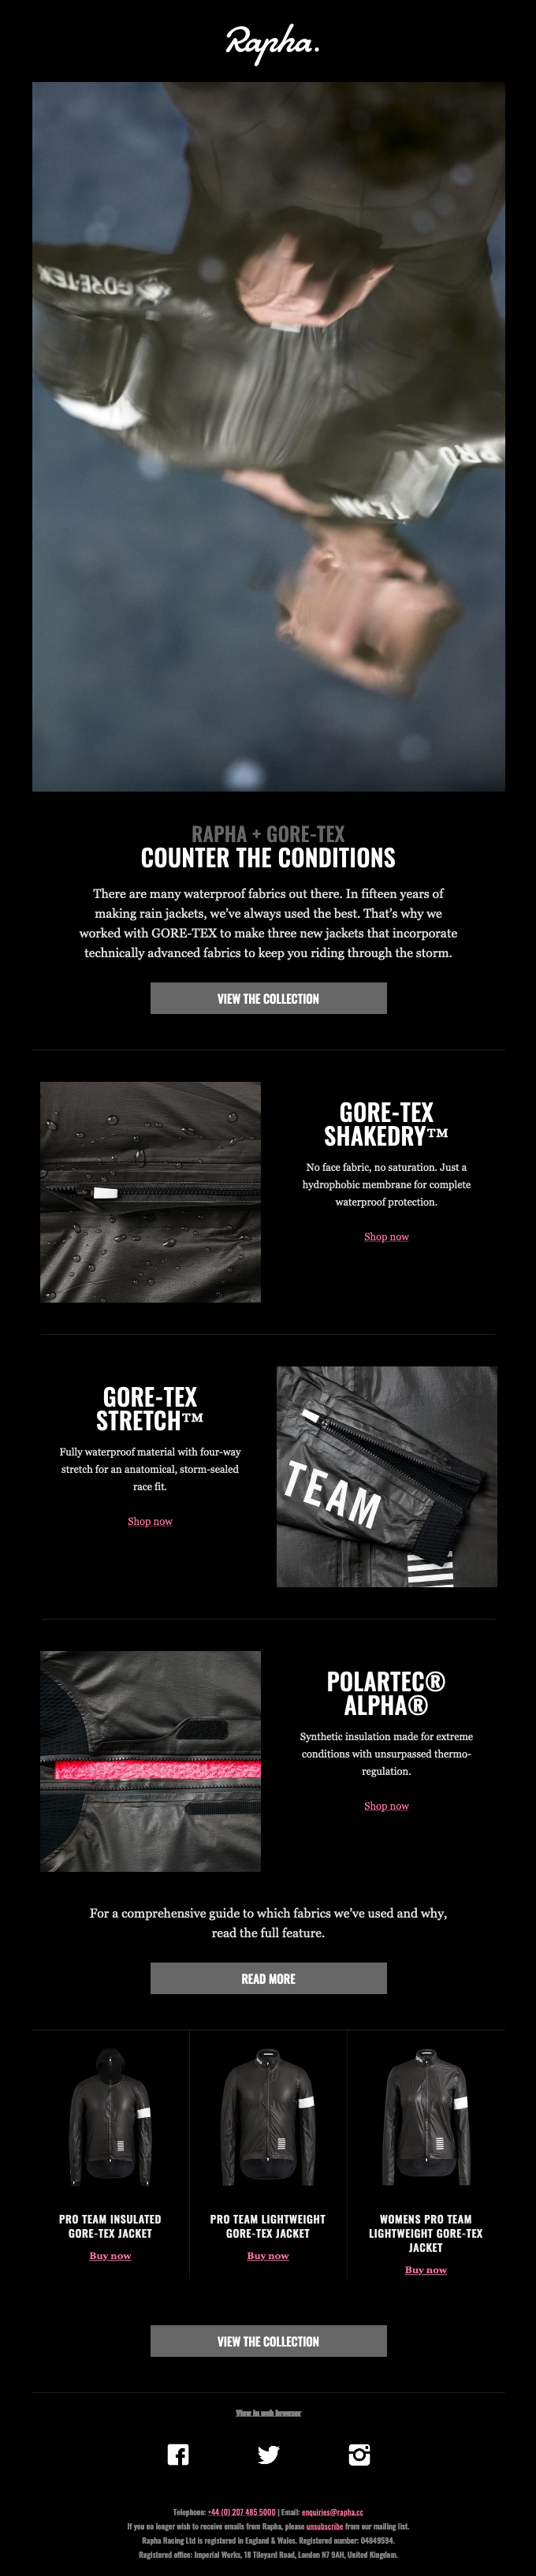 Rapha + GORE-TEX – For the most extreme conditions